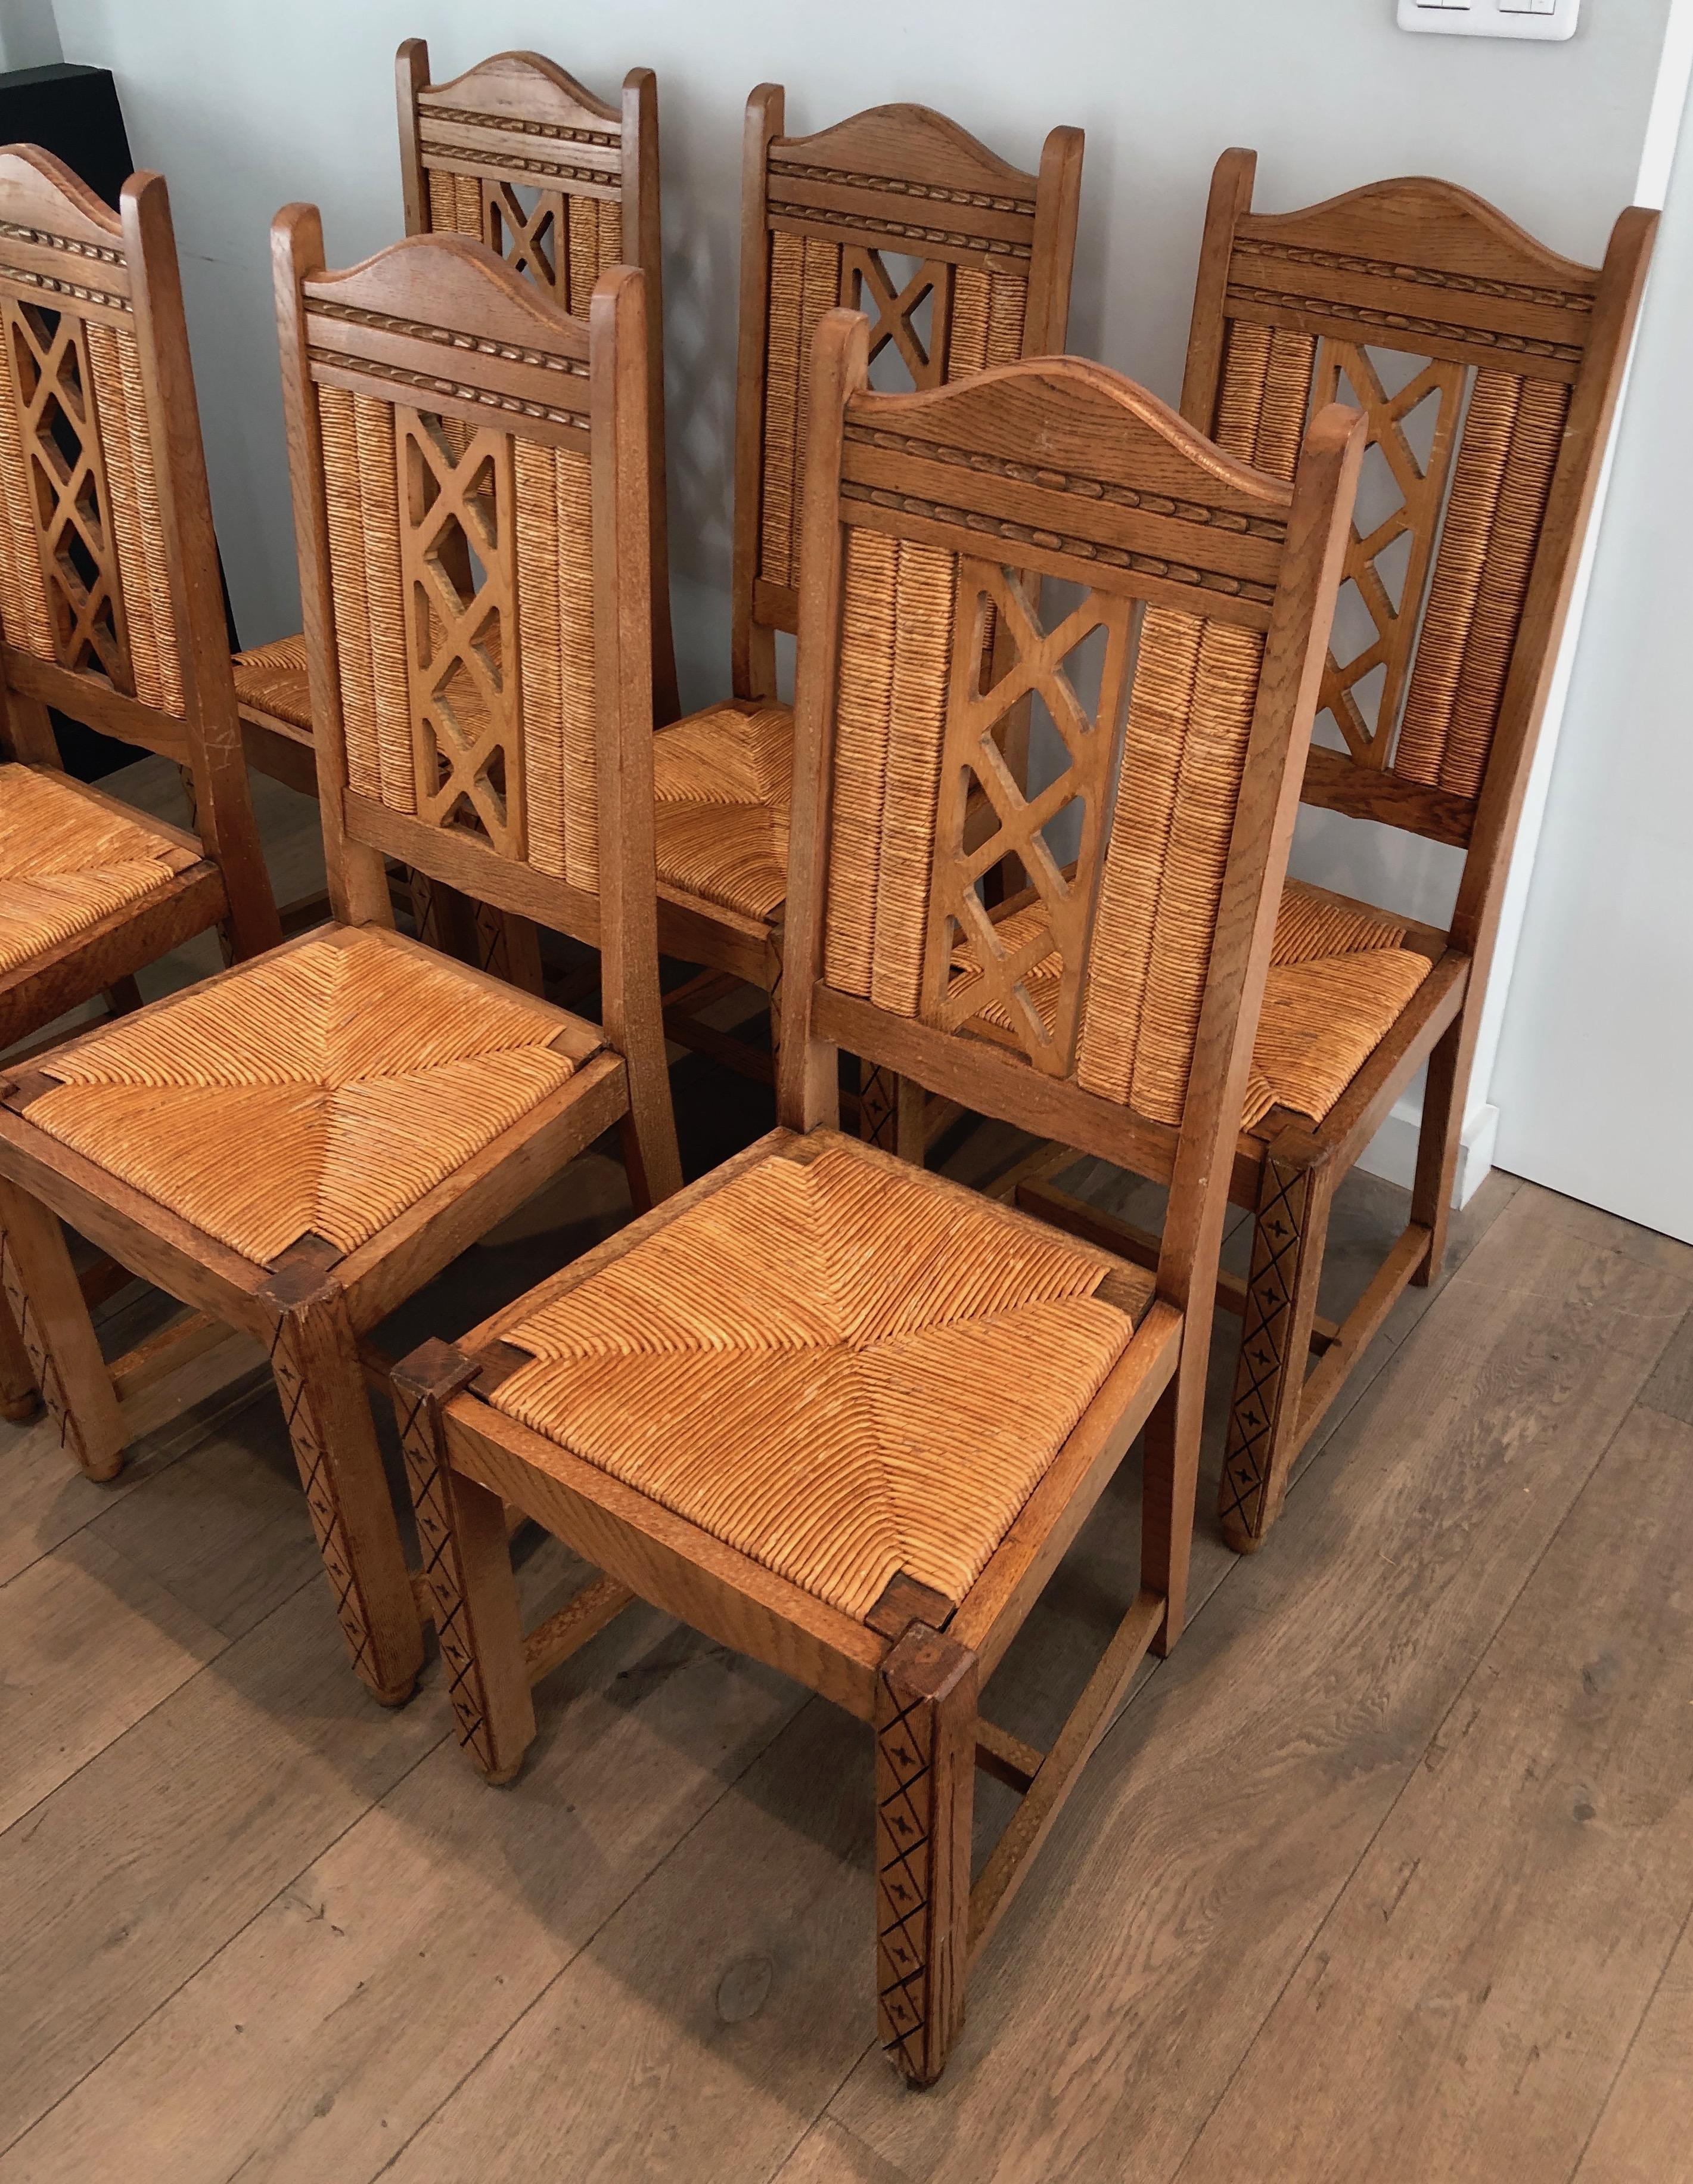 Set of 6 Brutalist Chairs Made of Ash and Straw, French Work, Circa 1950 In Good Condition For Sale In Marcq-en-Barœul, Hauts-de-France